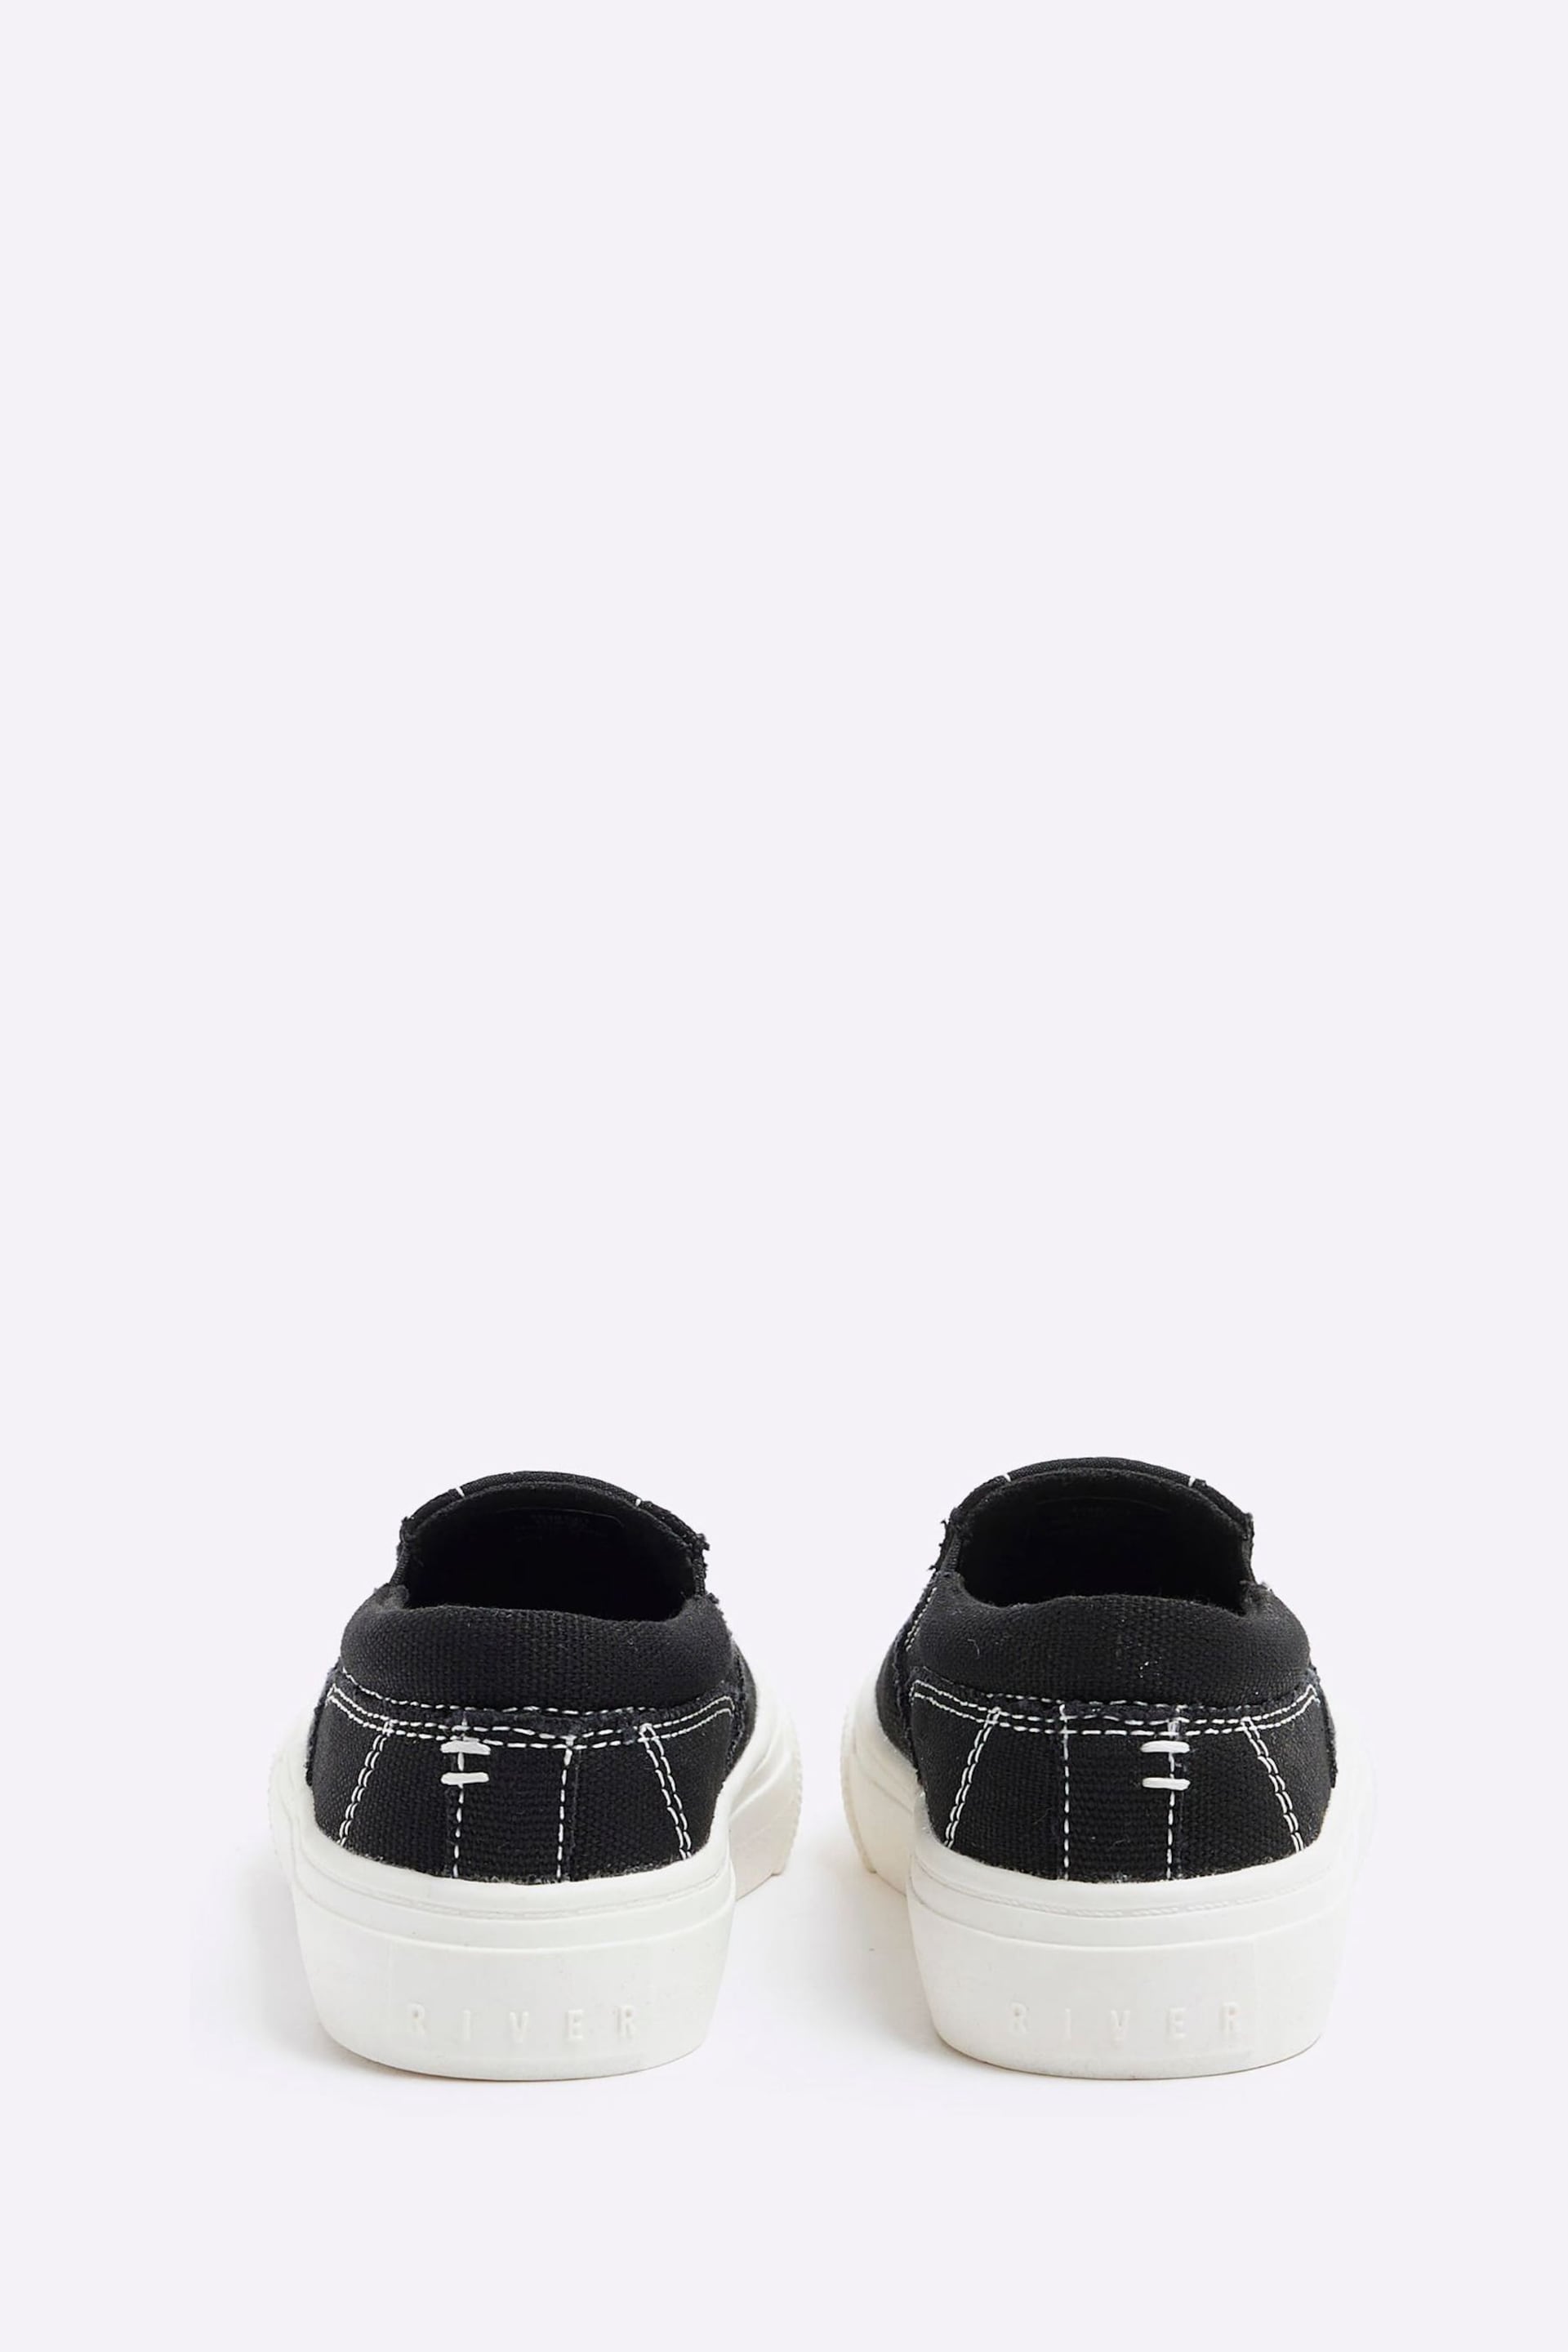 River Island Black Boys Canvas Slip-Ons Trainers - Image 2 of 4